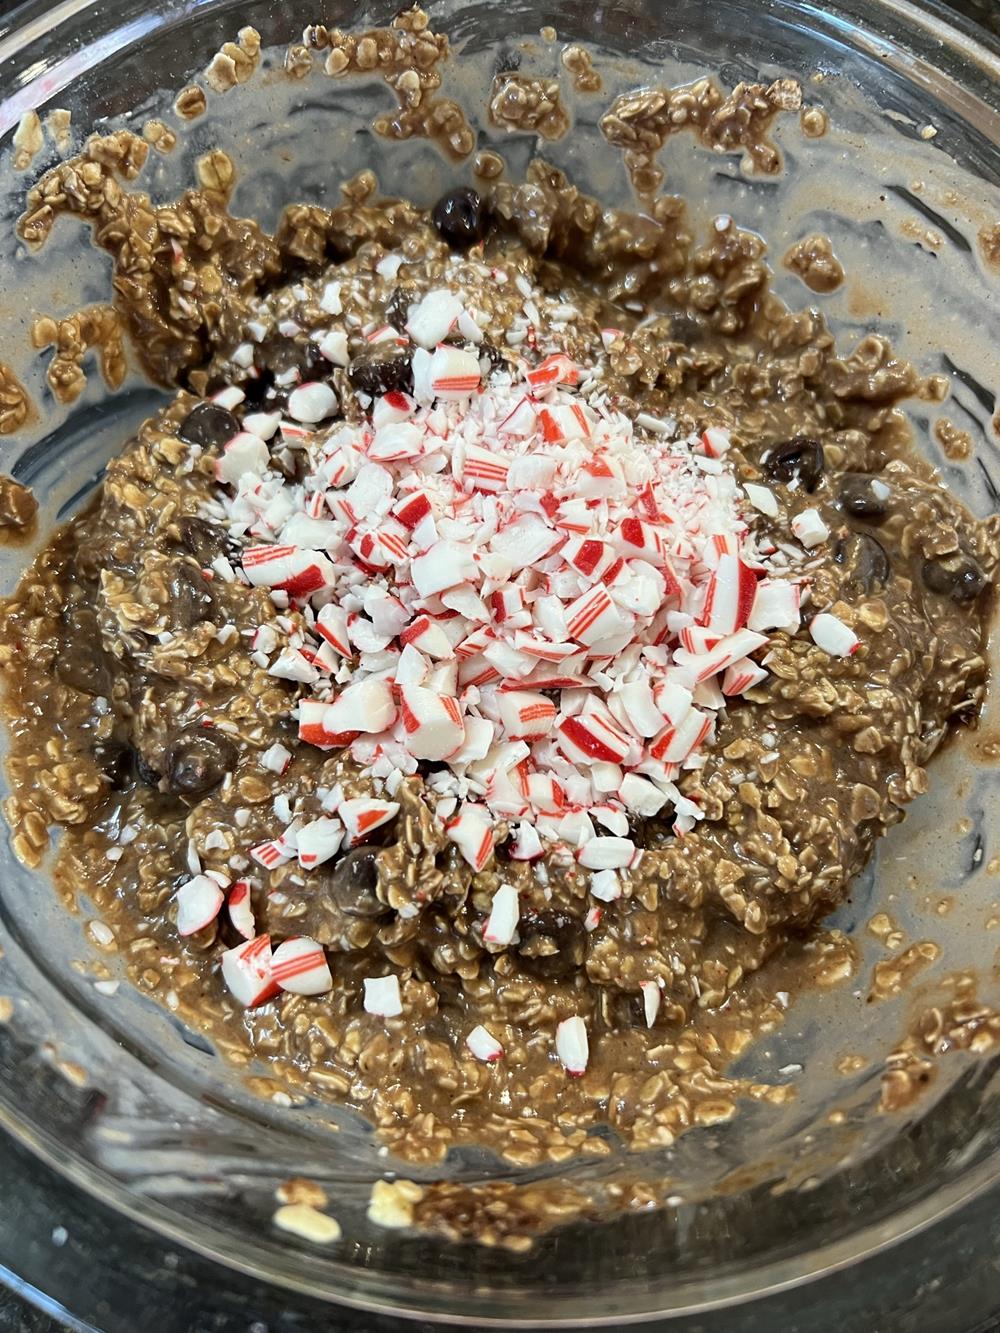 oatmeal, chocolate chips, eggs, candy canes and baked oatmeal ingredients in glass bowl